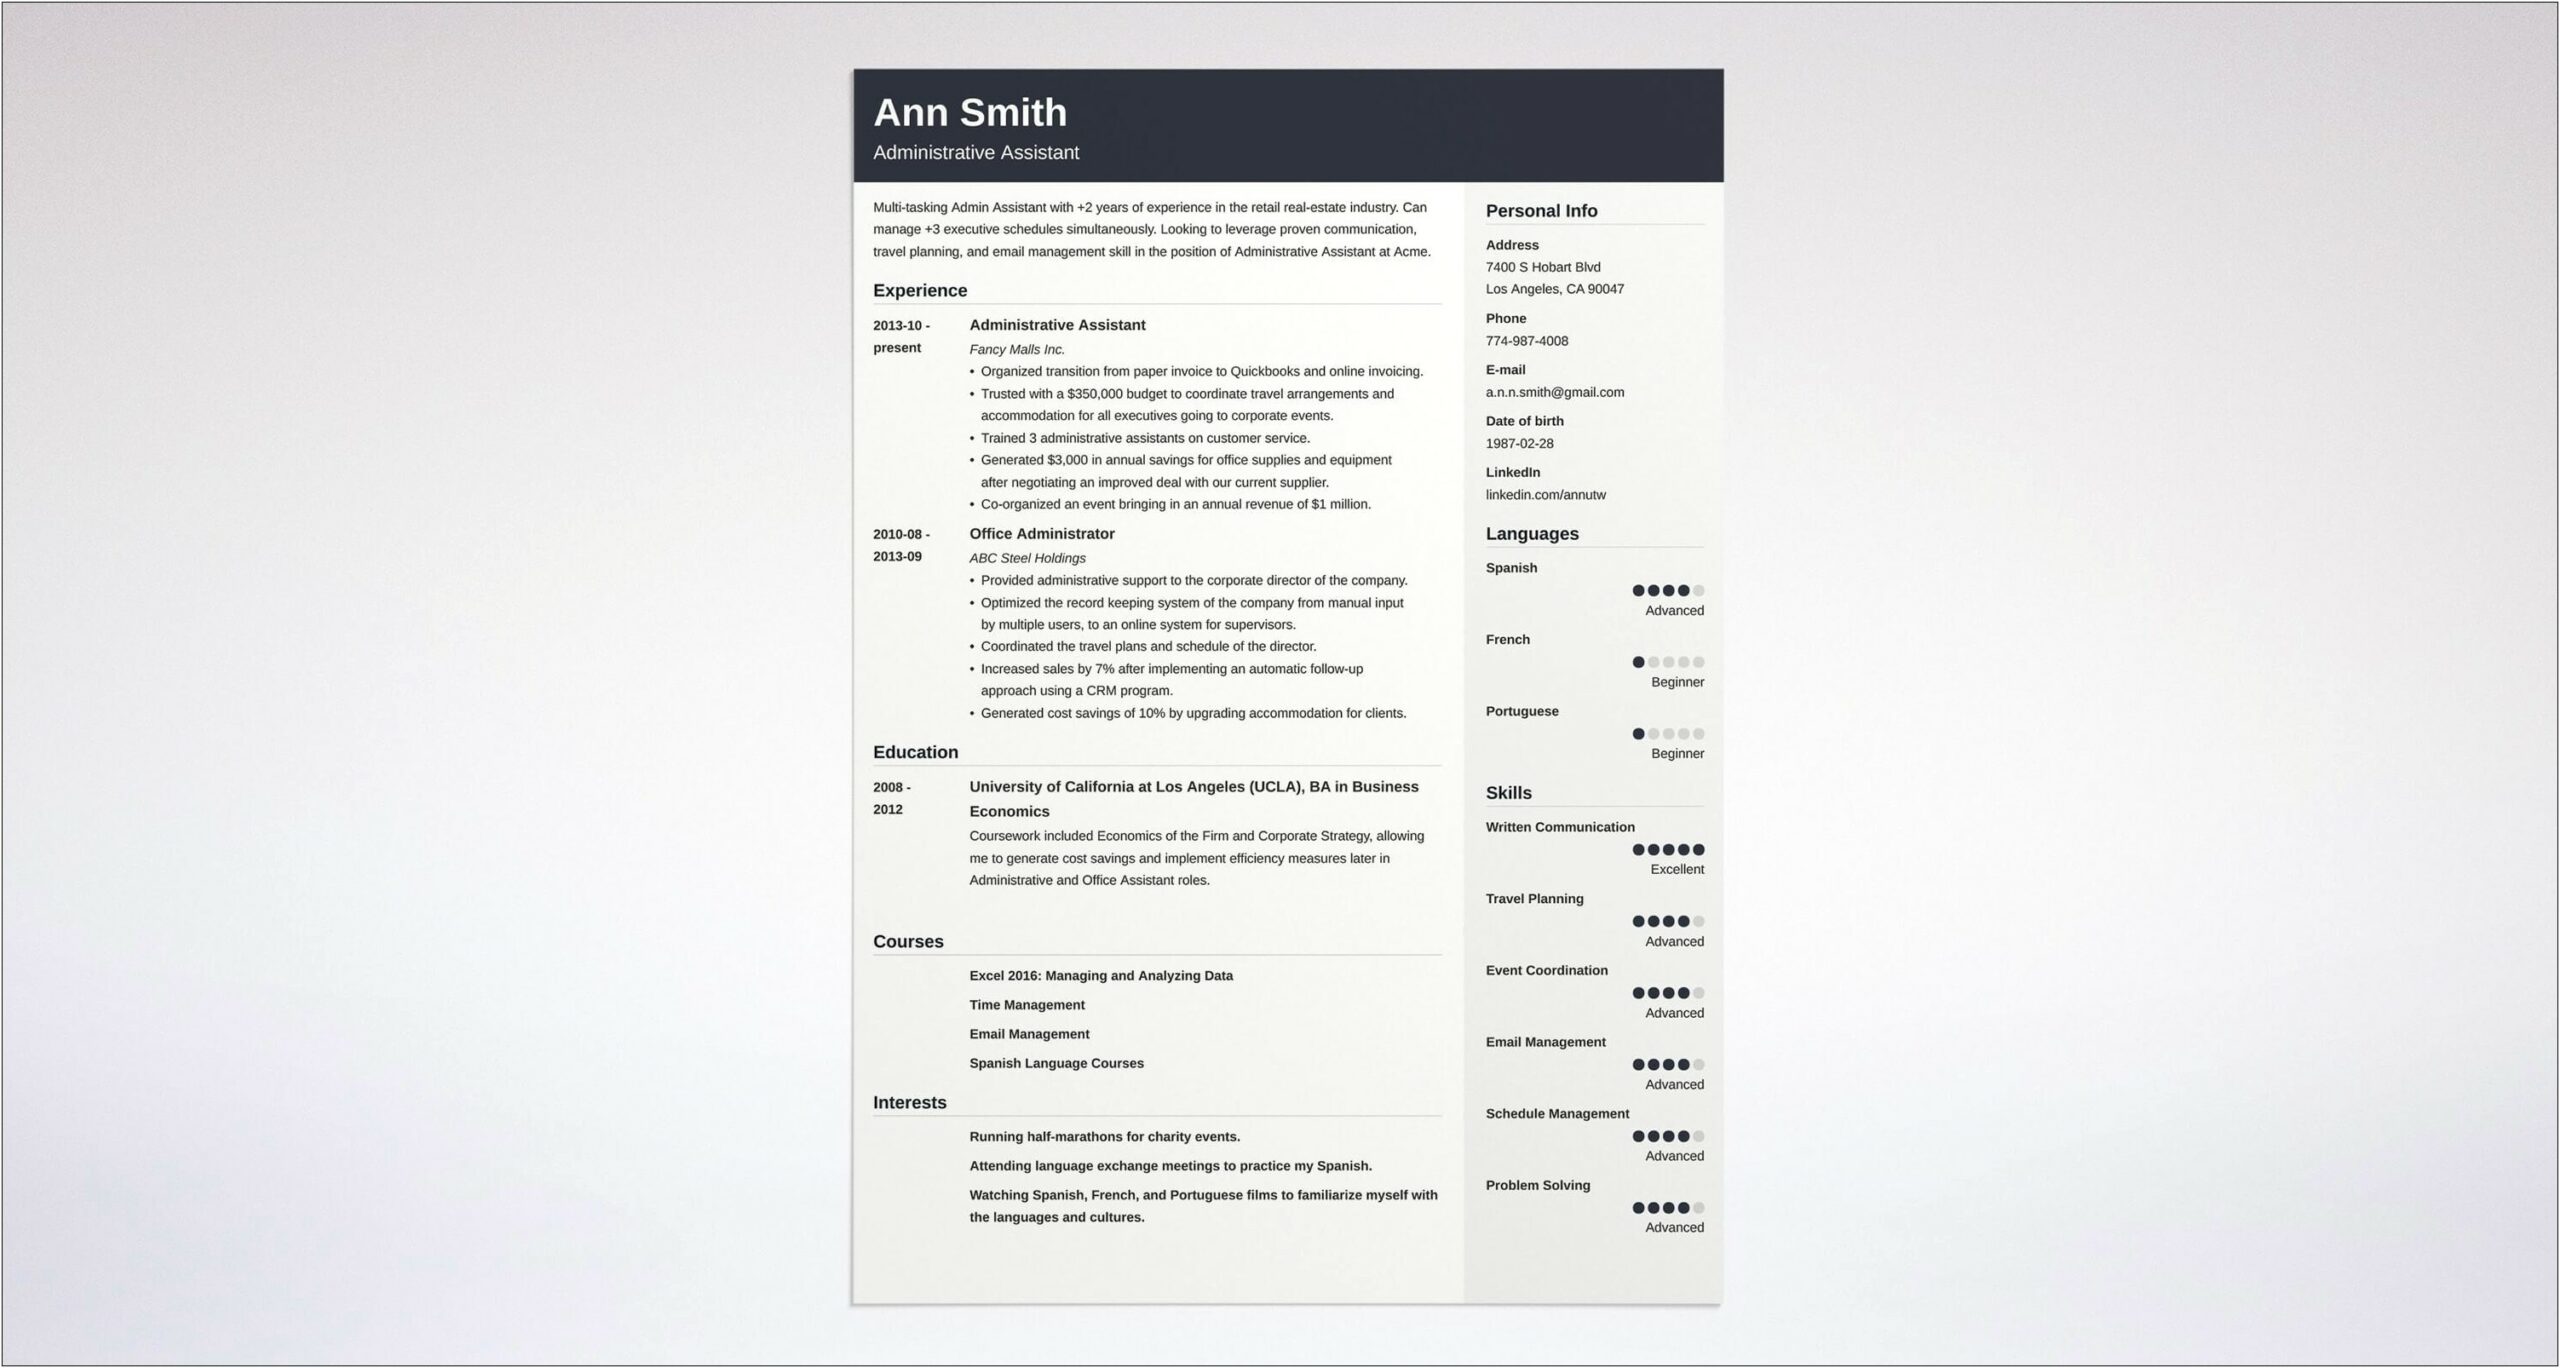 Administrative Support Specialist Resume Samples